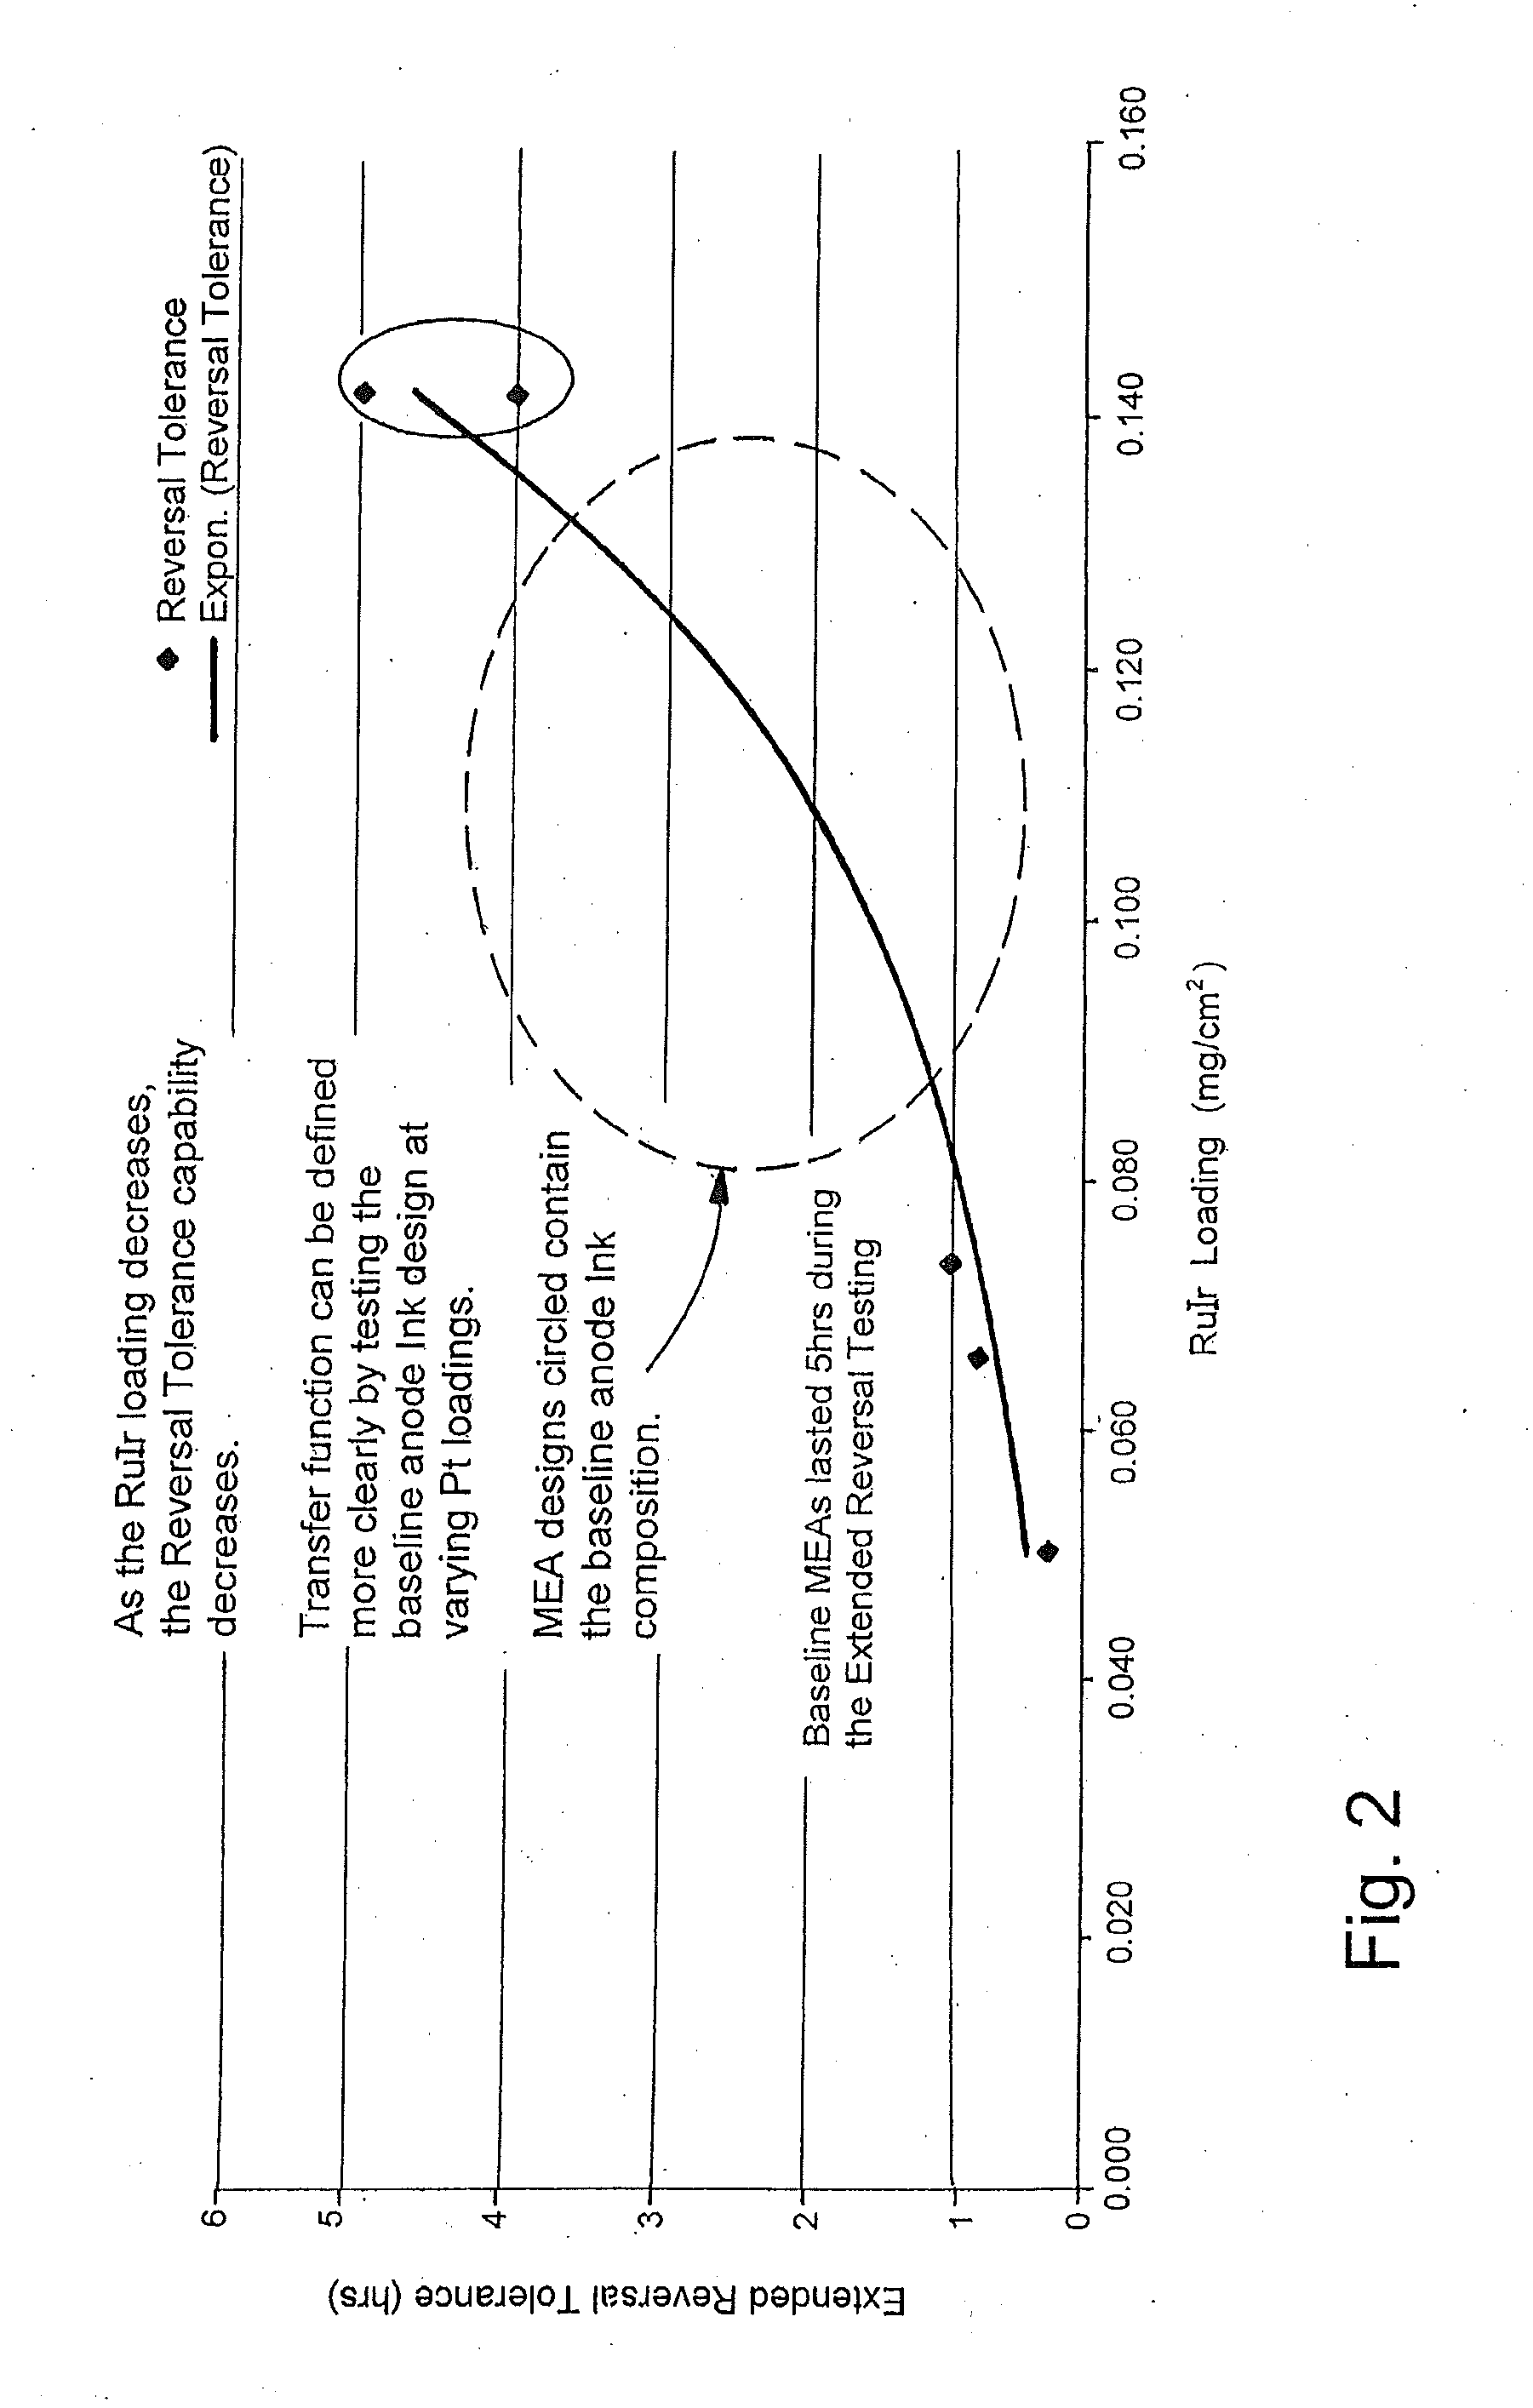 Reversal tolerant membrane electrode assembly for a fuel cell